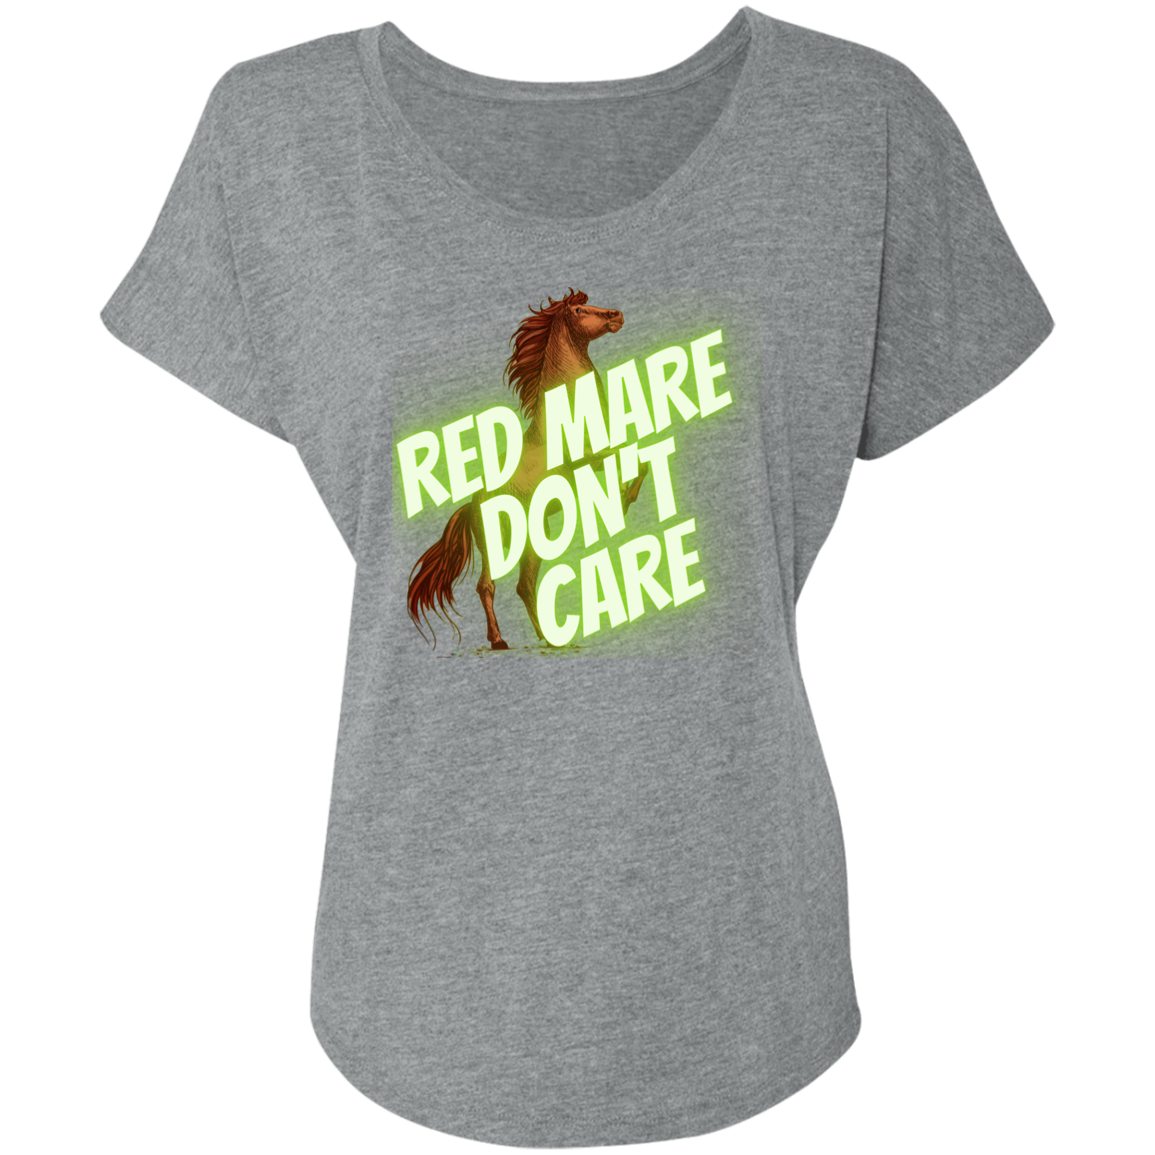 RED MARE DON'T CARE T-SHIRT FOR WOMEN - MyAllOutHorses